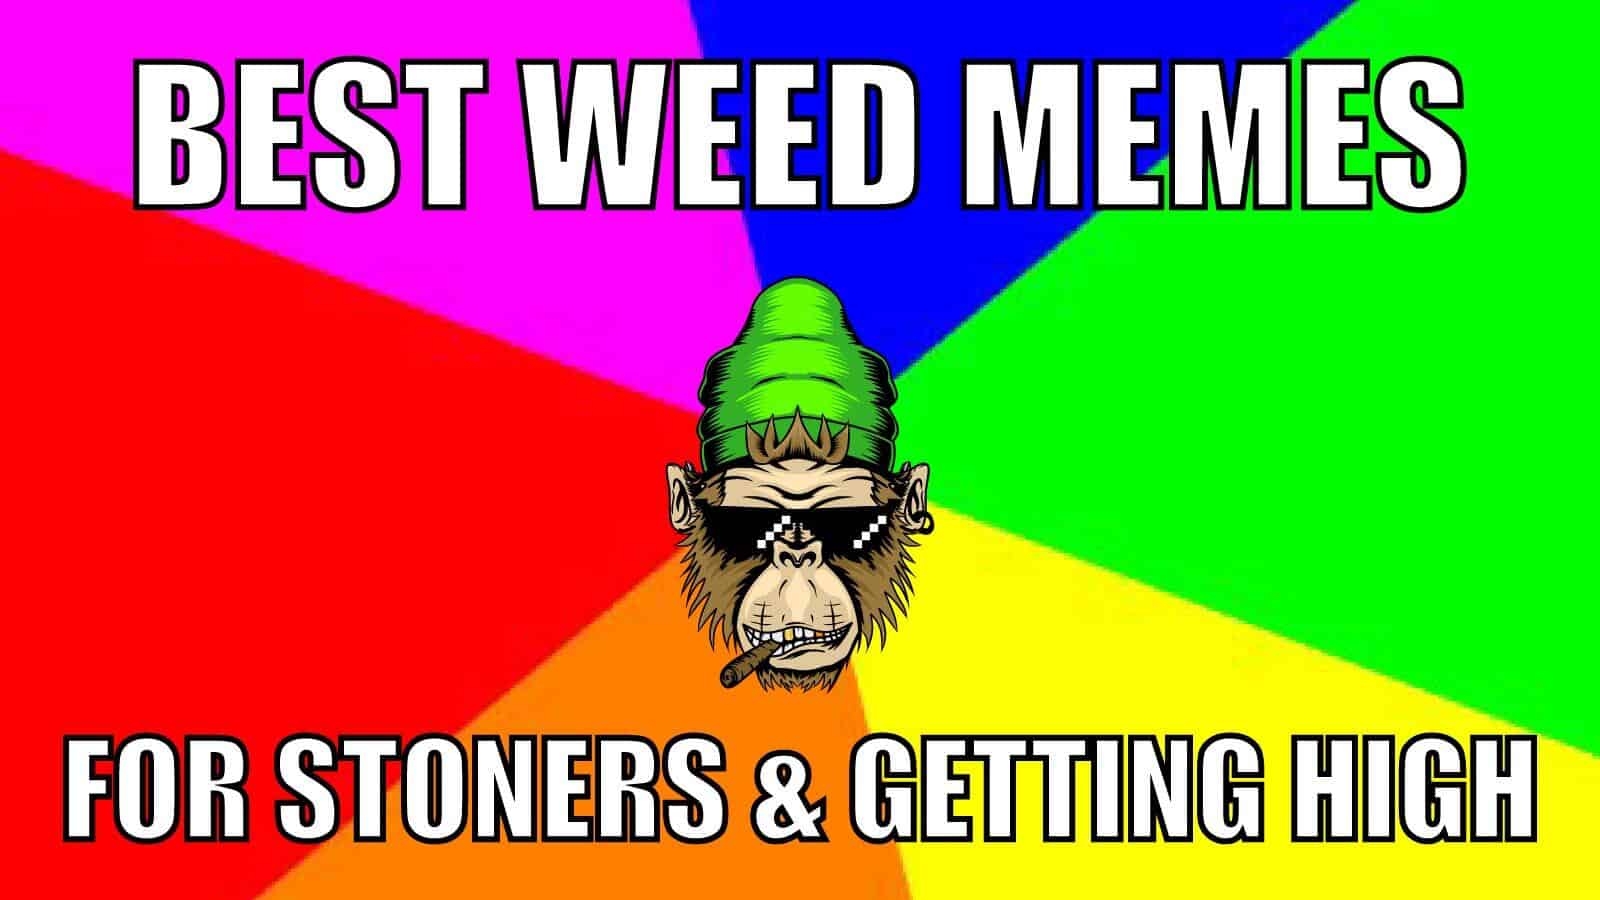 55 Best Weed Memes for Stoners & Getting High · Neonjoint